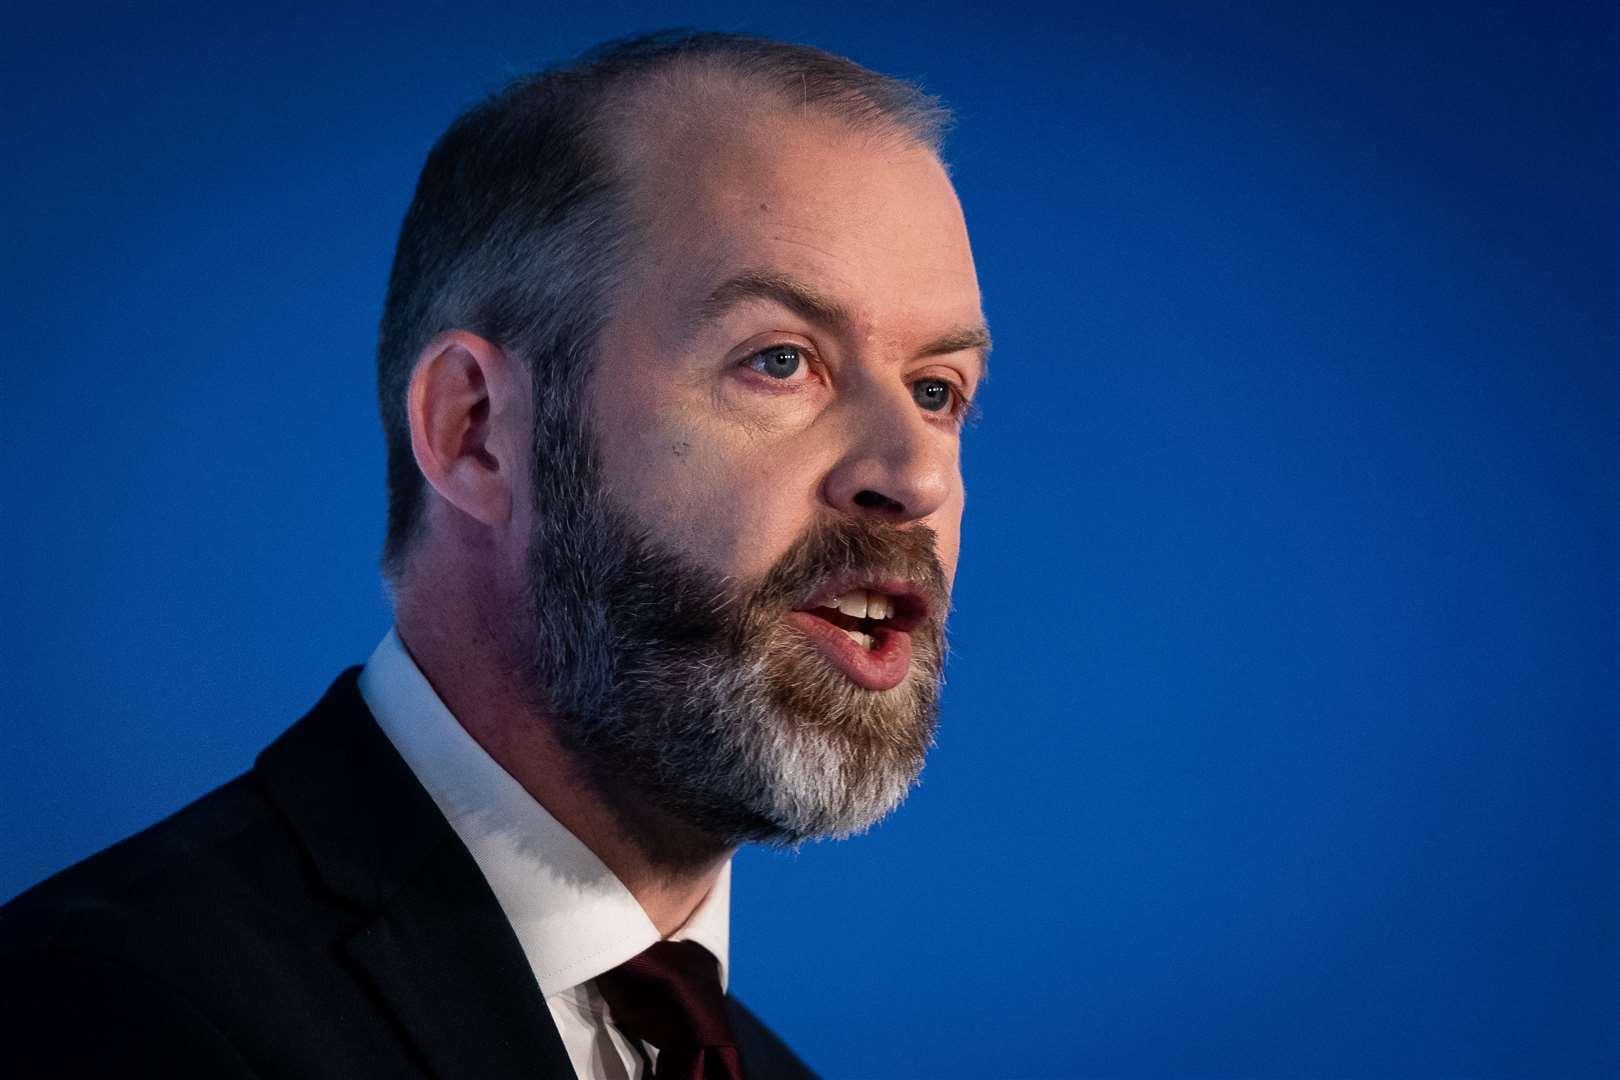 Shadow business secretary Jonathan Reynolds said that ‘under no circumstances’ should compensation for subpostmasters and subpostmistresses be delayed (Aaron Chown/PA)